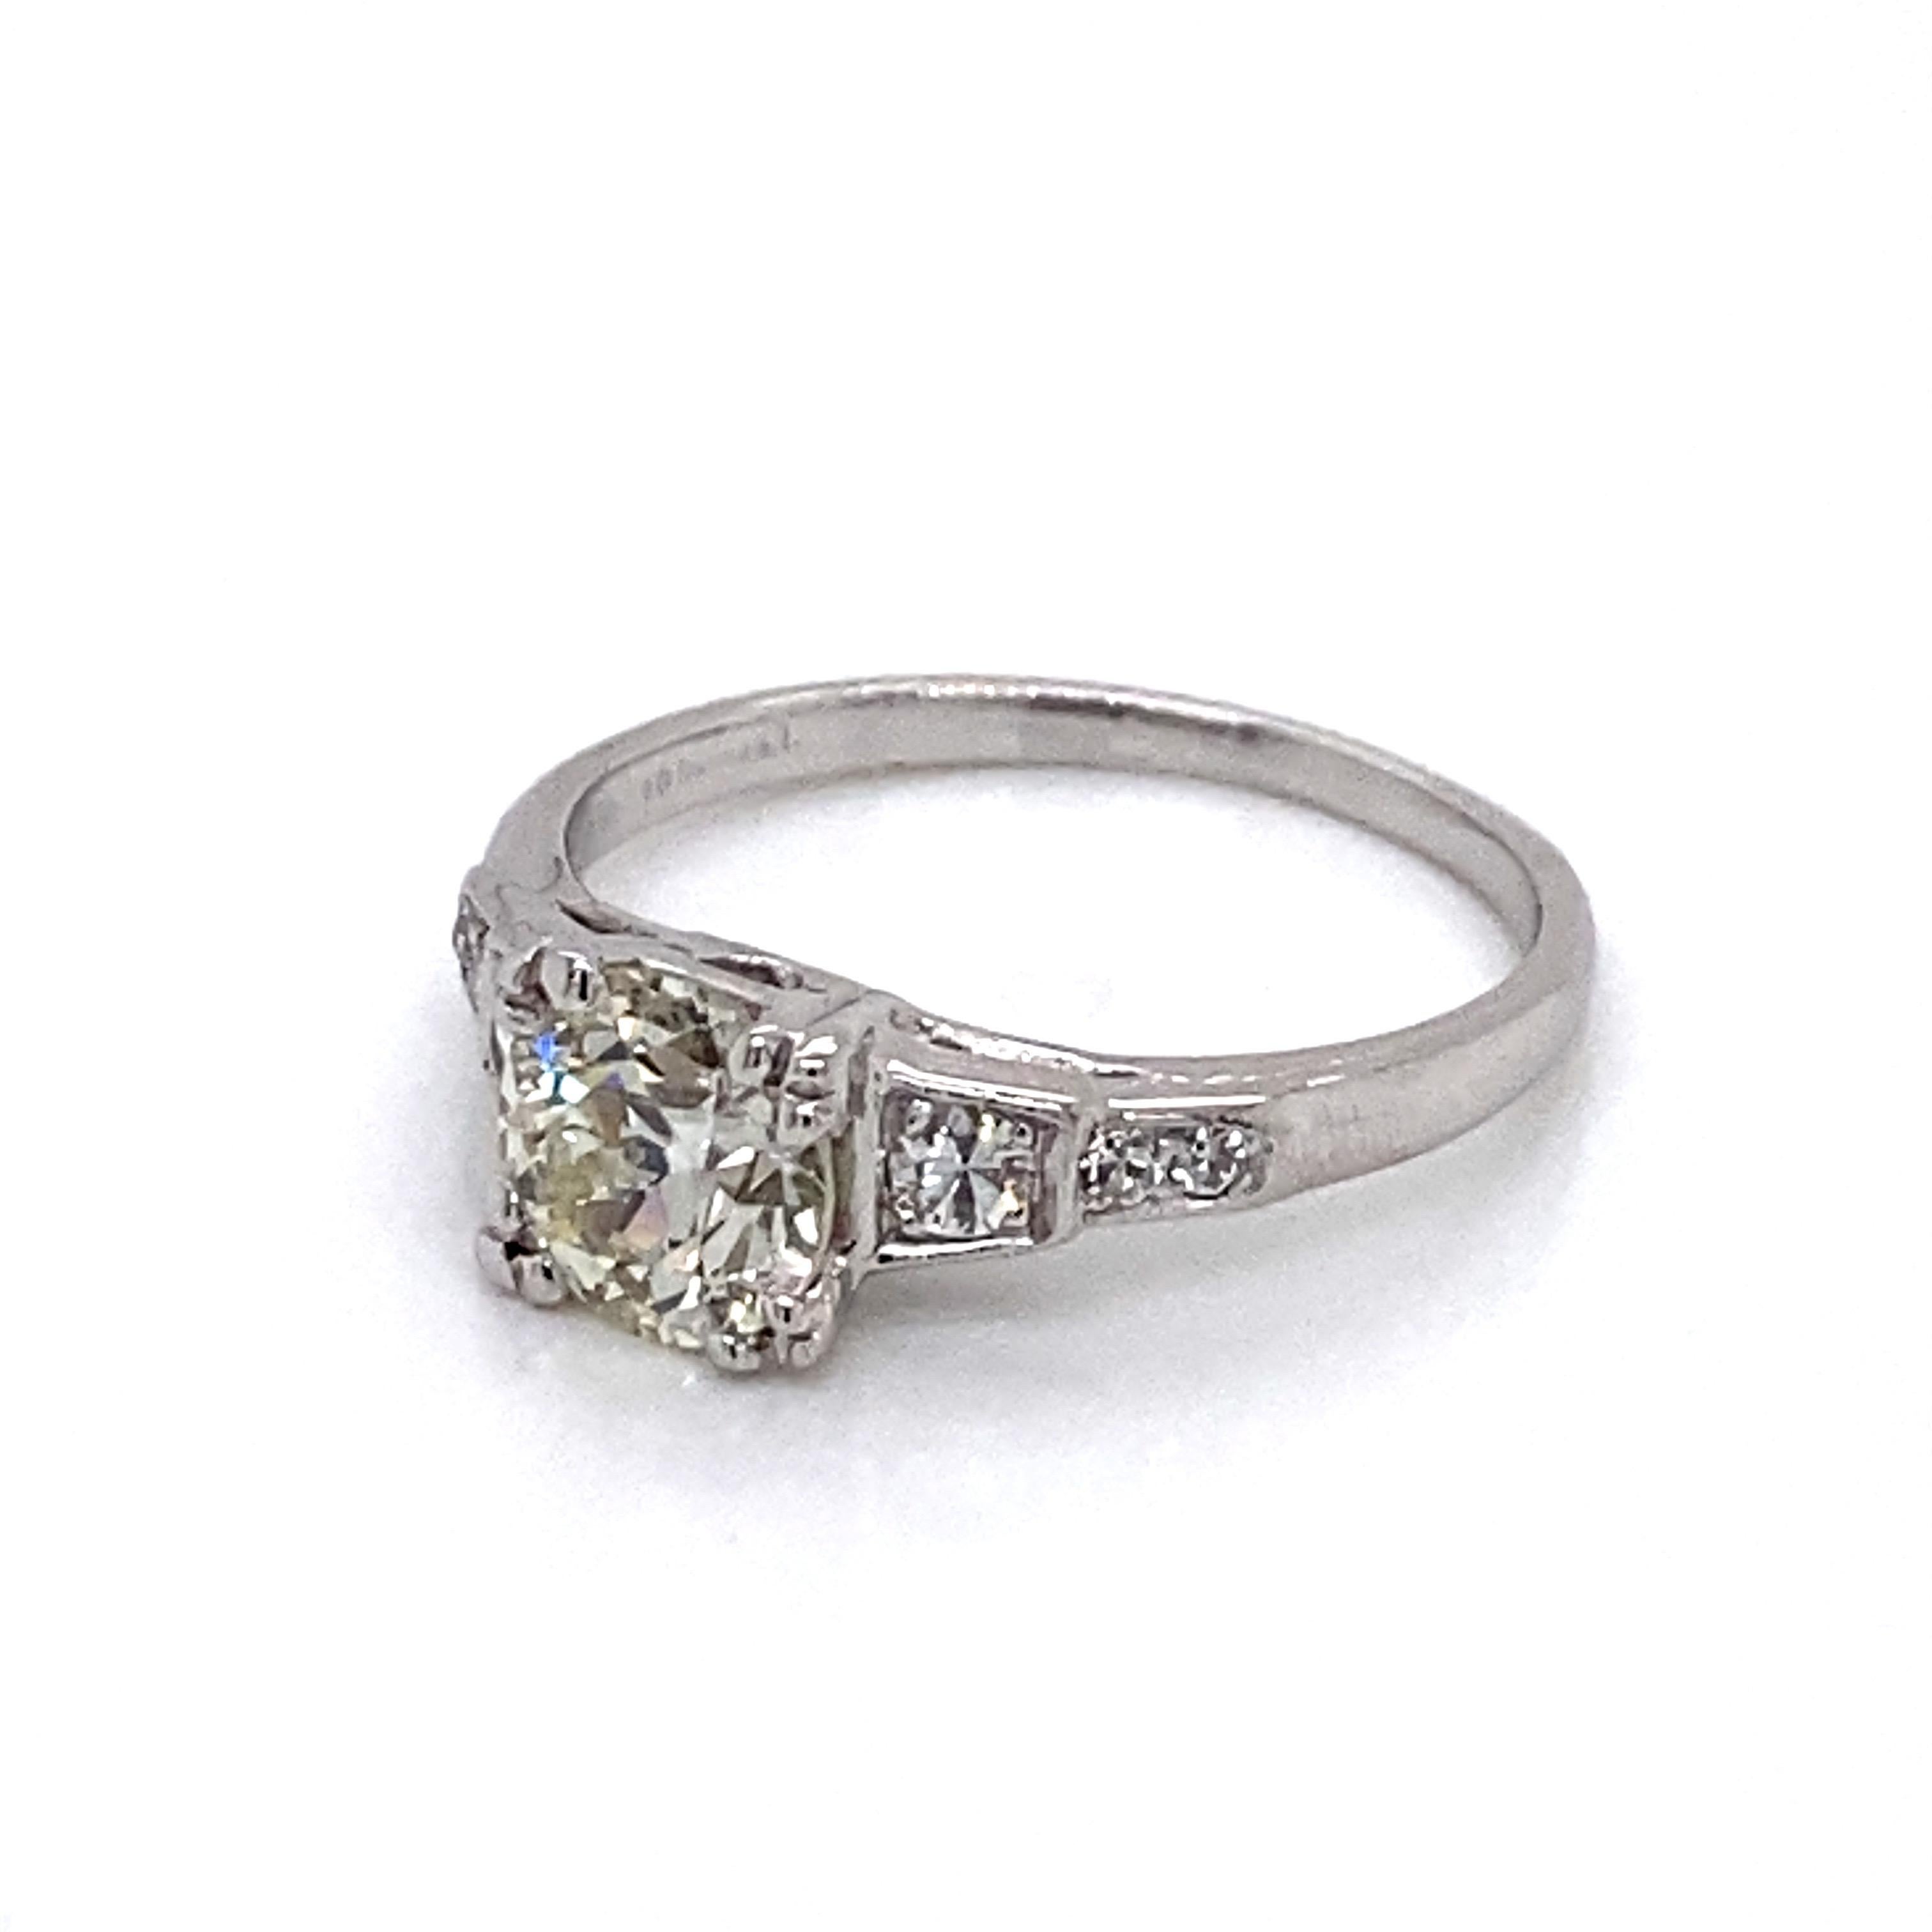 Vintage 1930s Art Deco European Cut Diamond Platinum Engagement Ring - The center diamond has a weight of 1.16ct, with K color, and VS2 clarity. The diamond sit low in an Art Deco platinum setting accented with 6 single cut diamonds. The side